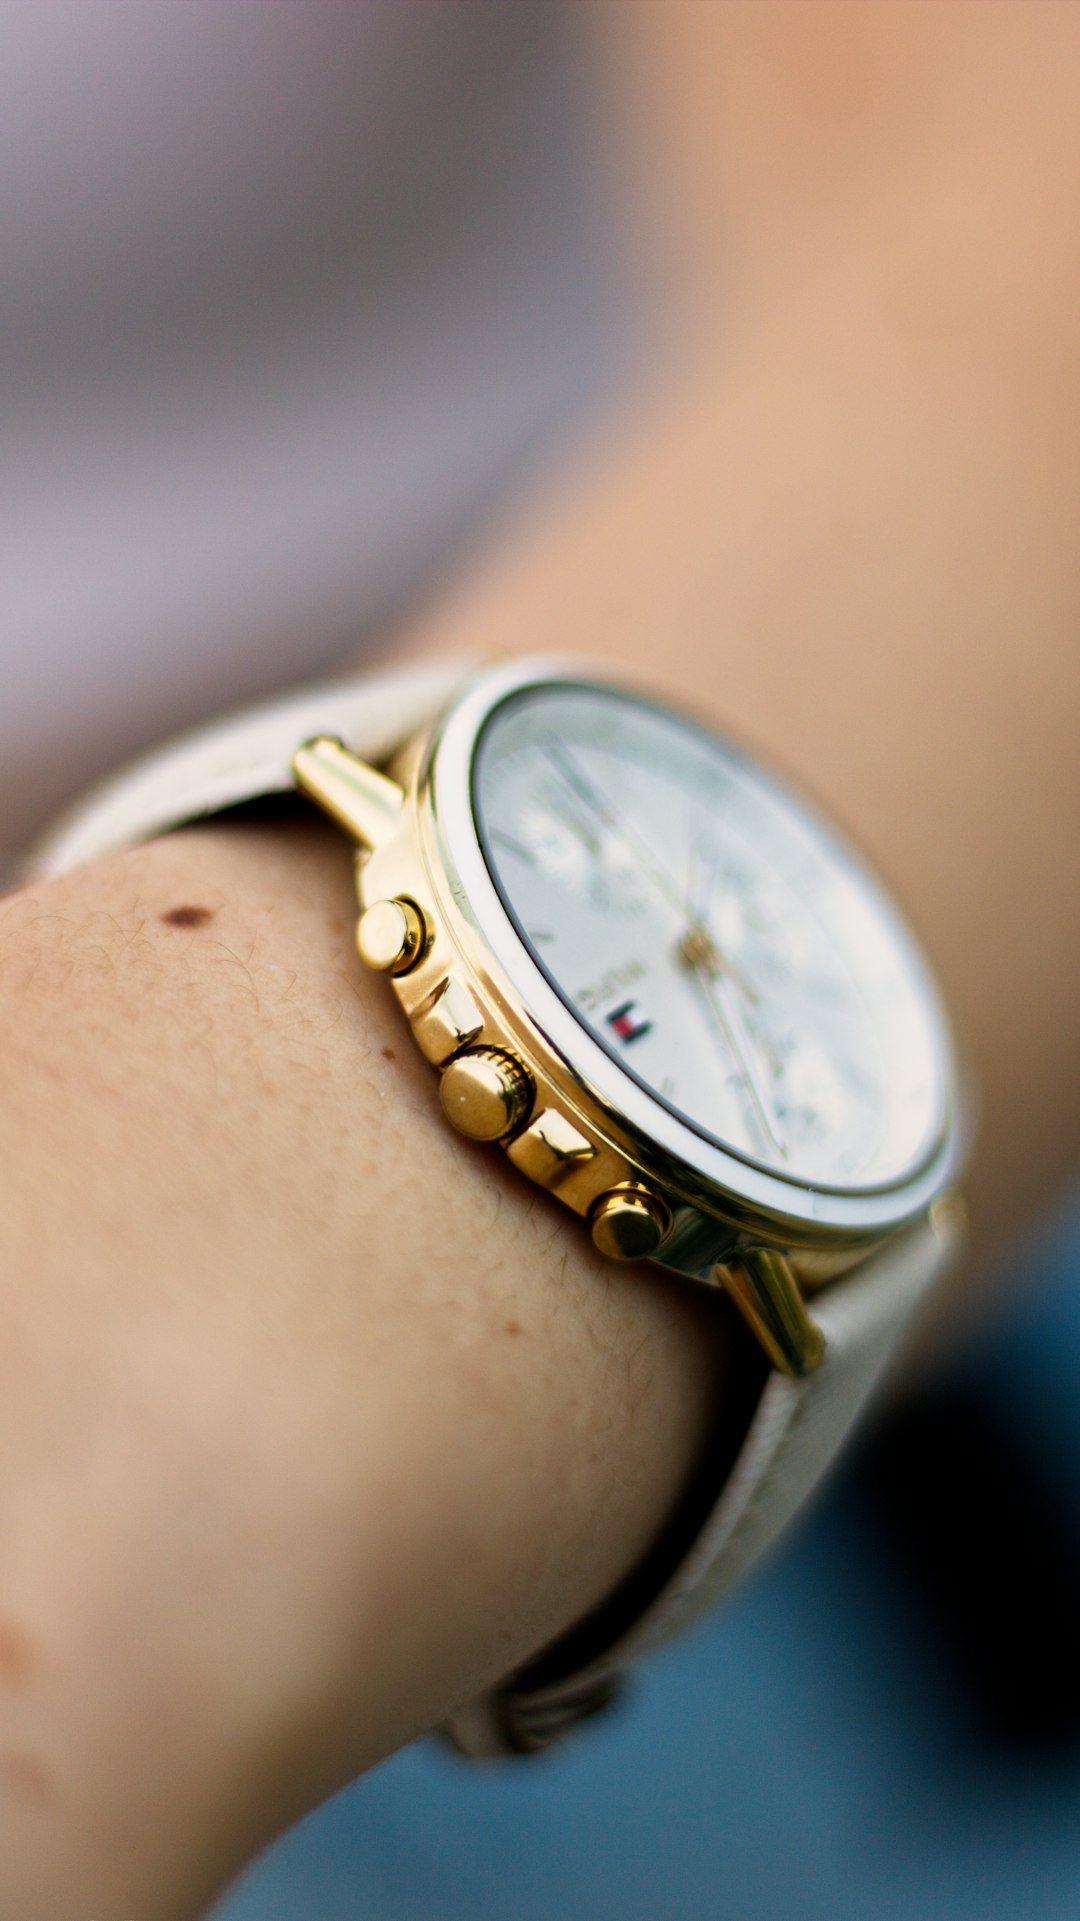 person wearing gold and white analog watch